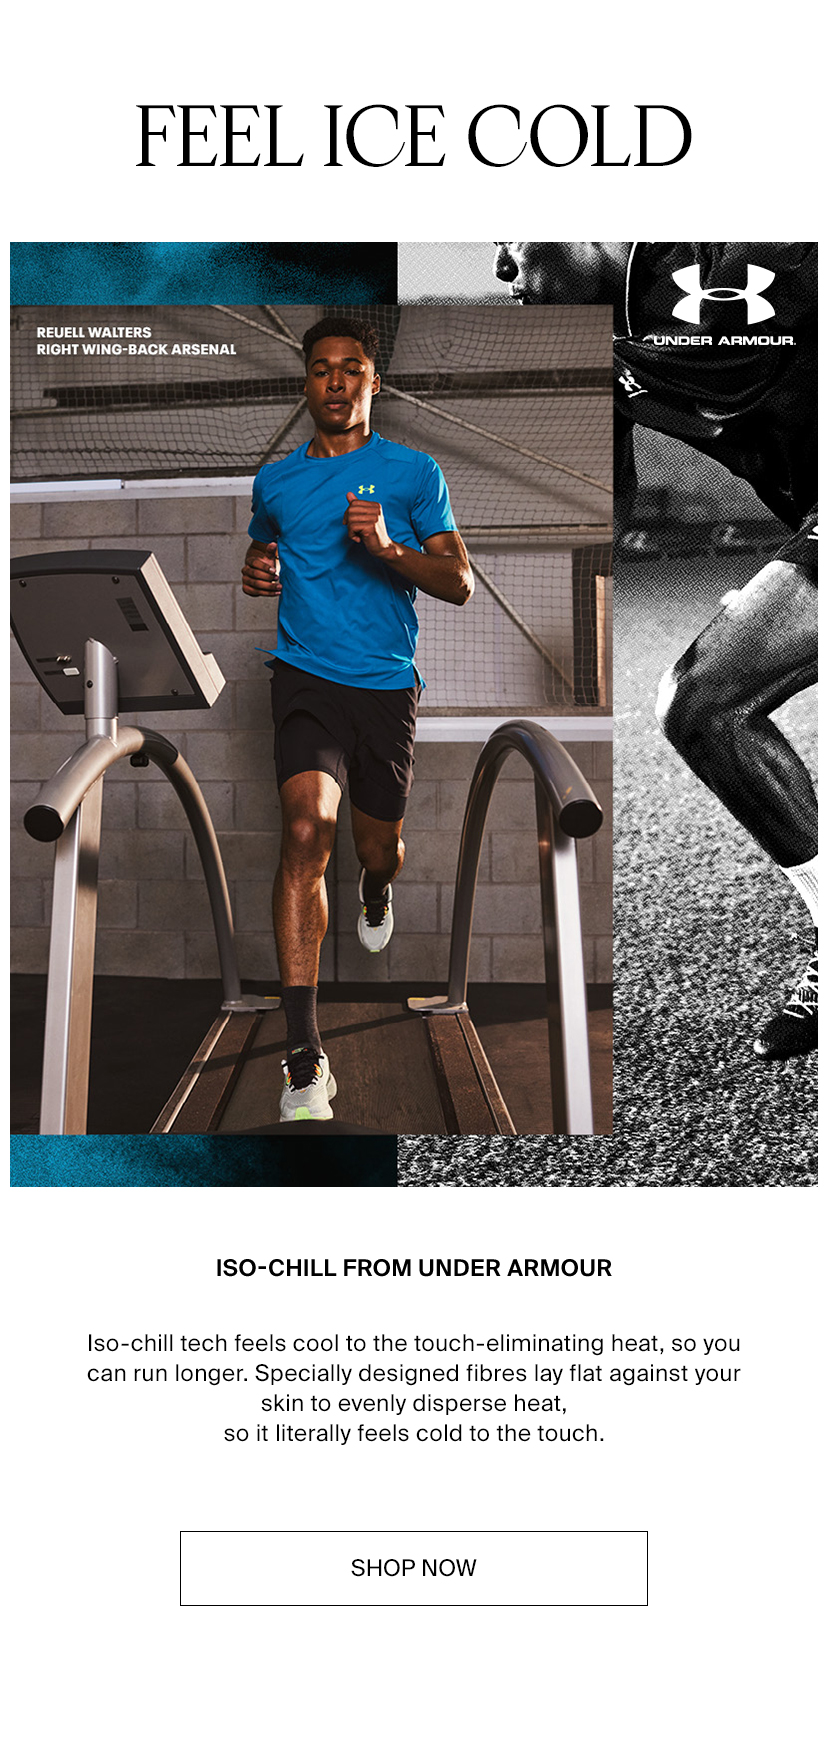 FEEL ICE COLD S VL CIVETCY CIE N BN Y LI T T i ISO-CHILL FROM UNDER ARMOUR Iso-chill tech feels cool to the touch-eliminating heat, so you can run longer. Specially designed fibres lay flat against your skin to evenly disperse heat, so it literally feels cold to the touch. SHOP NOW 